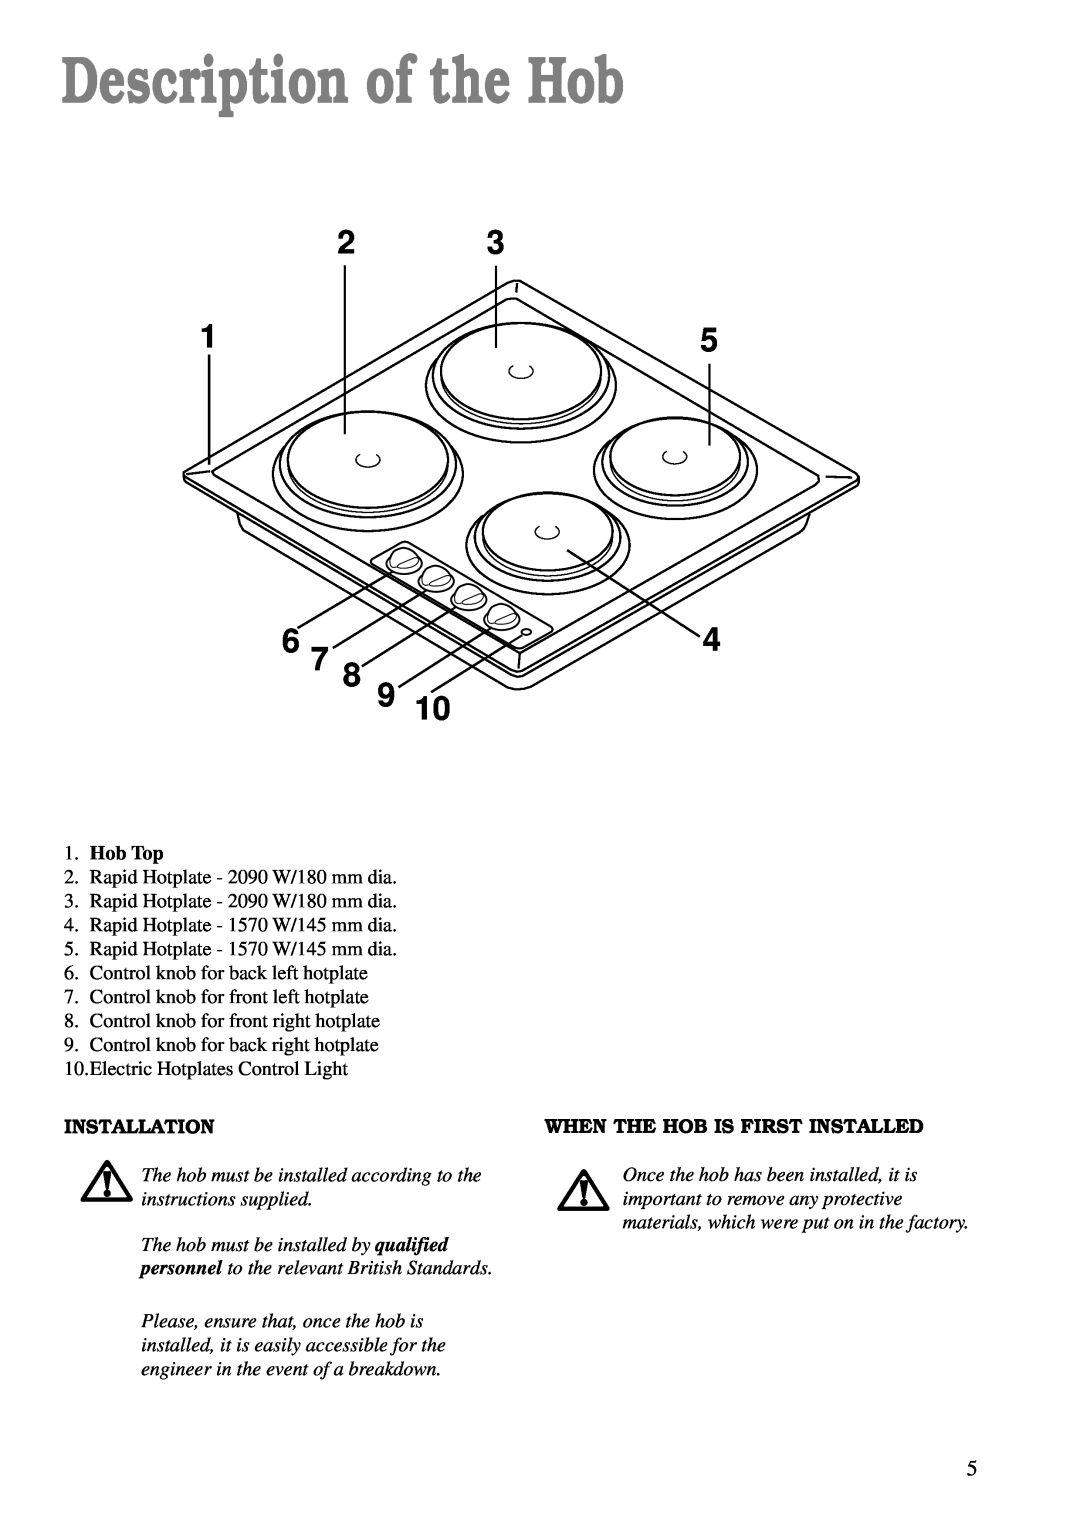 Zanussi ZBE 602 manual Description of the Hob, Hob Top, Installation, When The Hob Is First Installed 